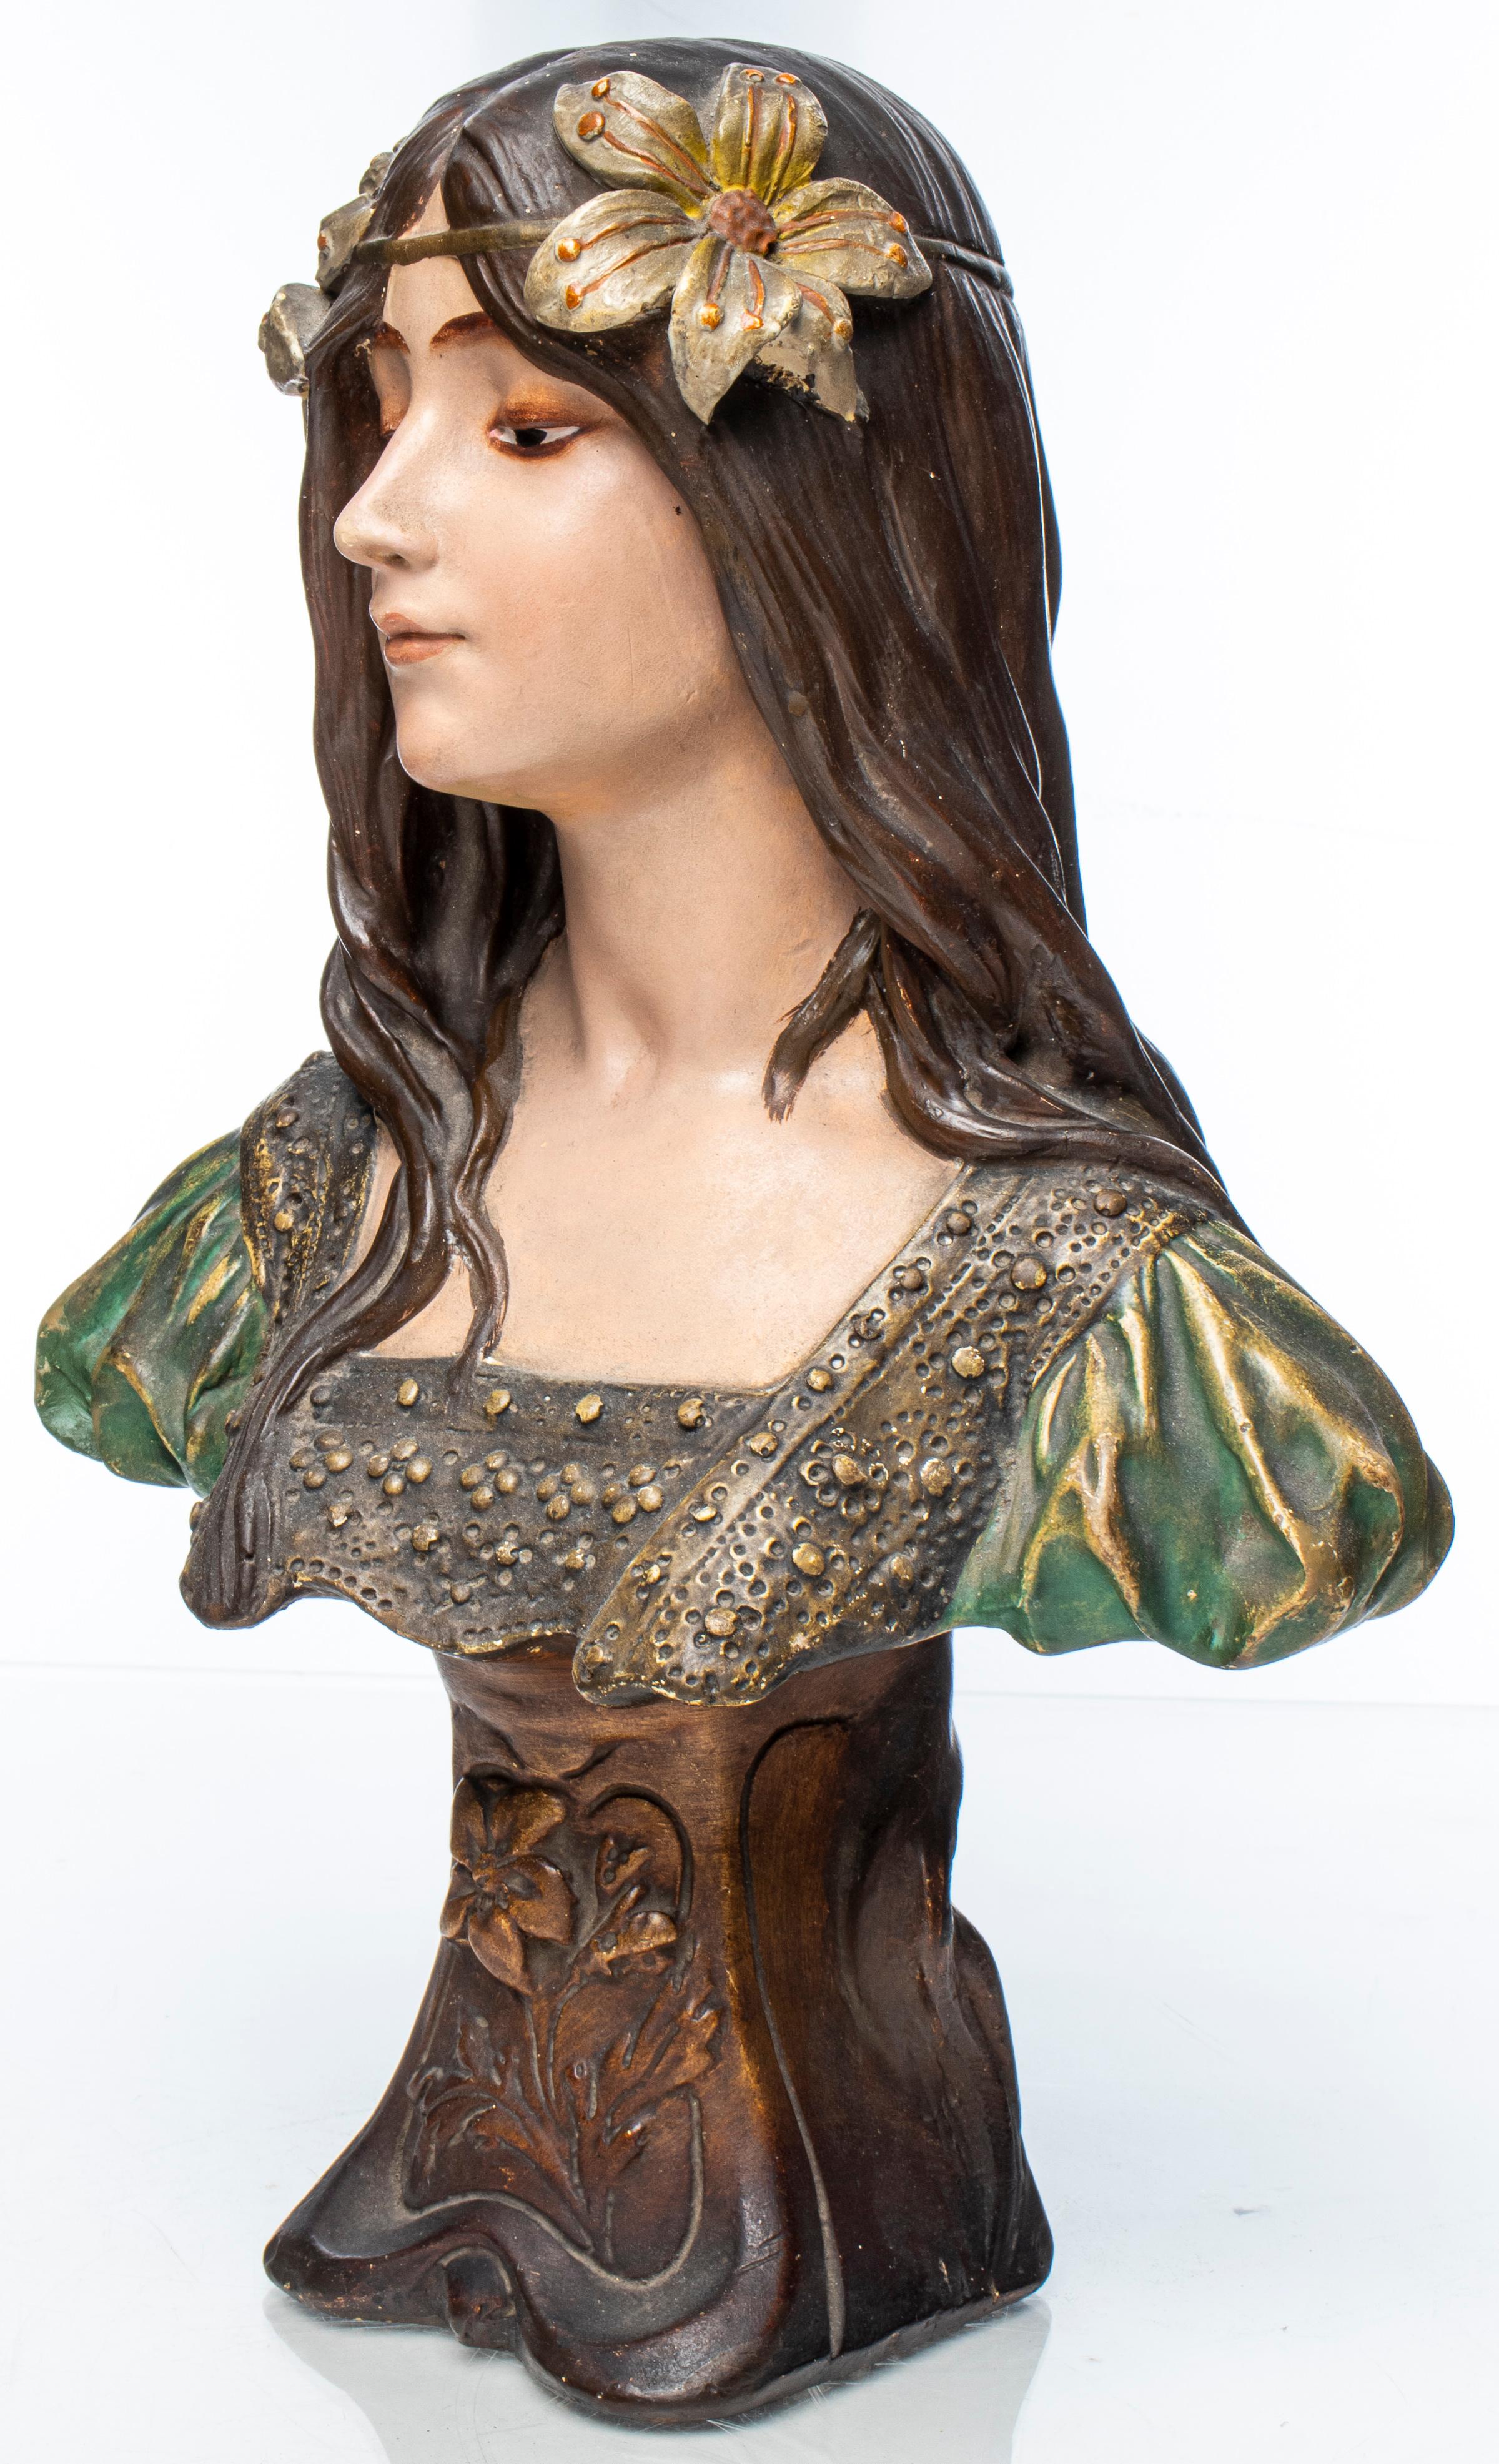 Art Nouveau ceramic portrait bust of a maiden, depicted with long flowing hair and floral wreath, stylized socle base with relief flowers. Measures: 15.5